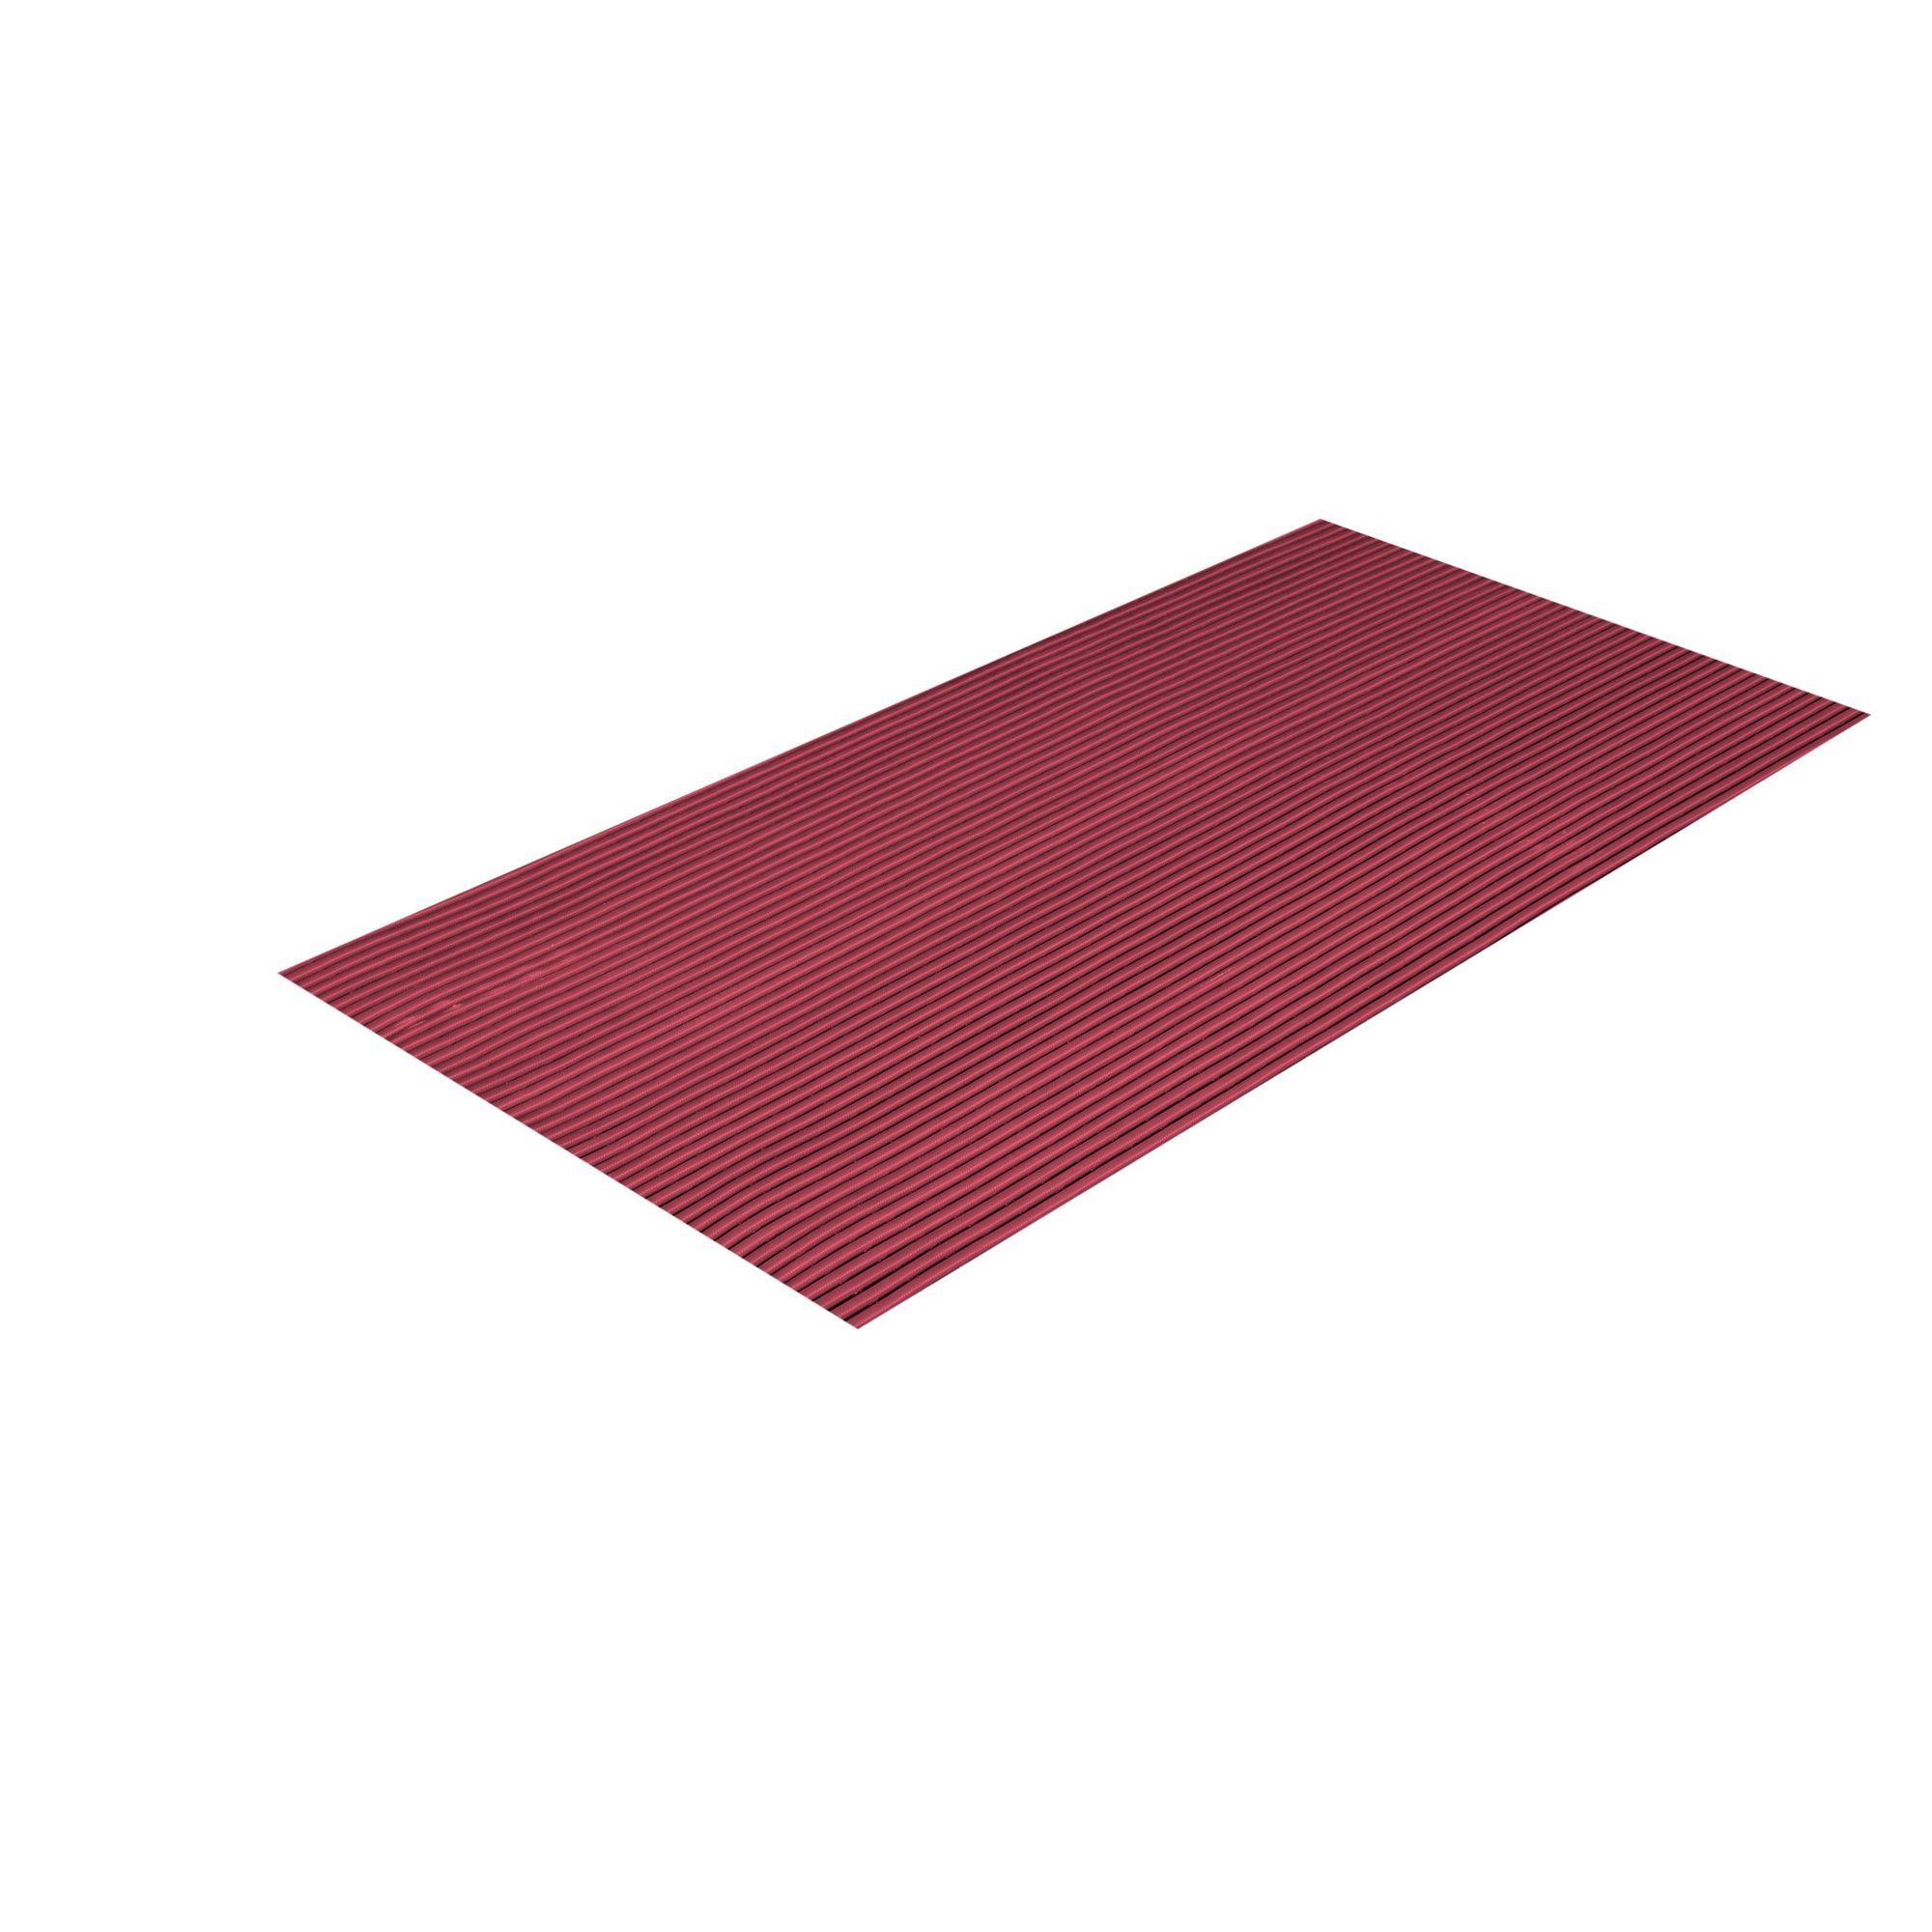 Crown Matting Technologies, Sani-Tred 3ft.x40ft. Mulberry Red, Width 36 in, Length 480 in, Thickness 15/32 in, Model HVR0036MR